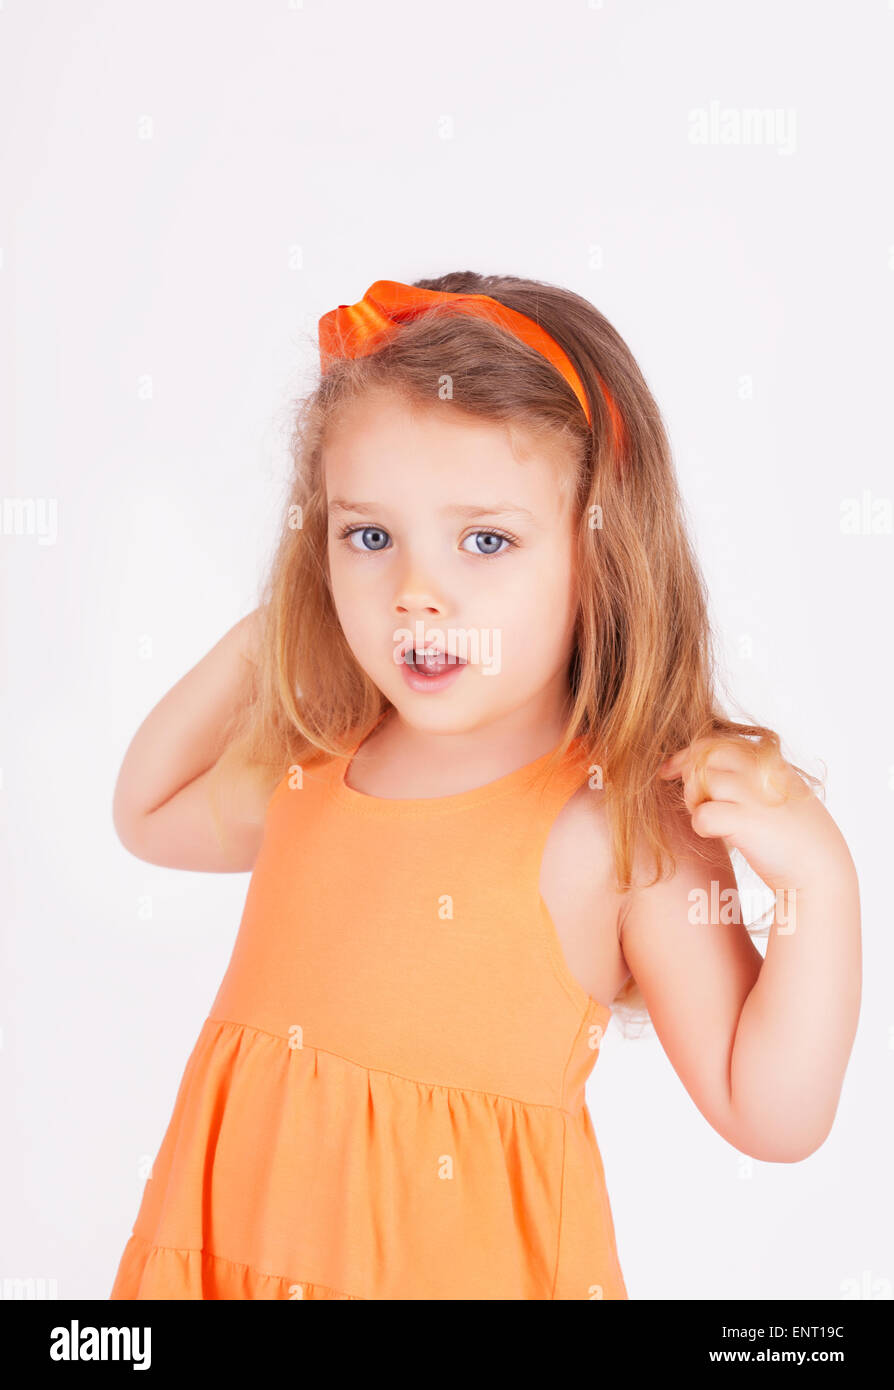 Portrait of a little girl on white background Stock Photo